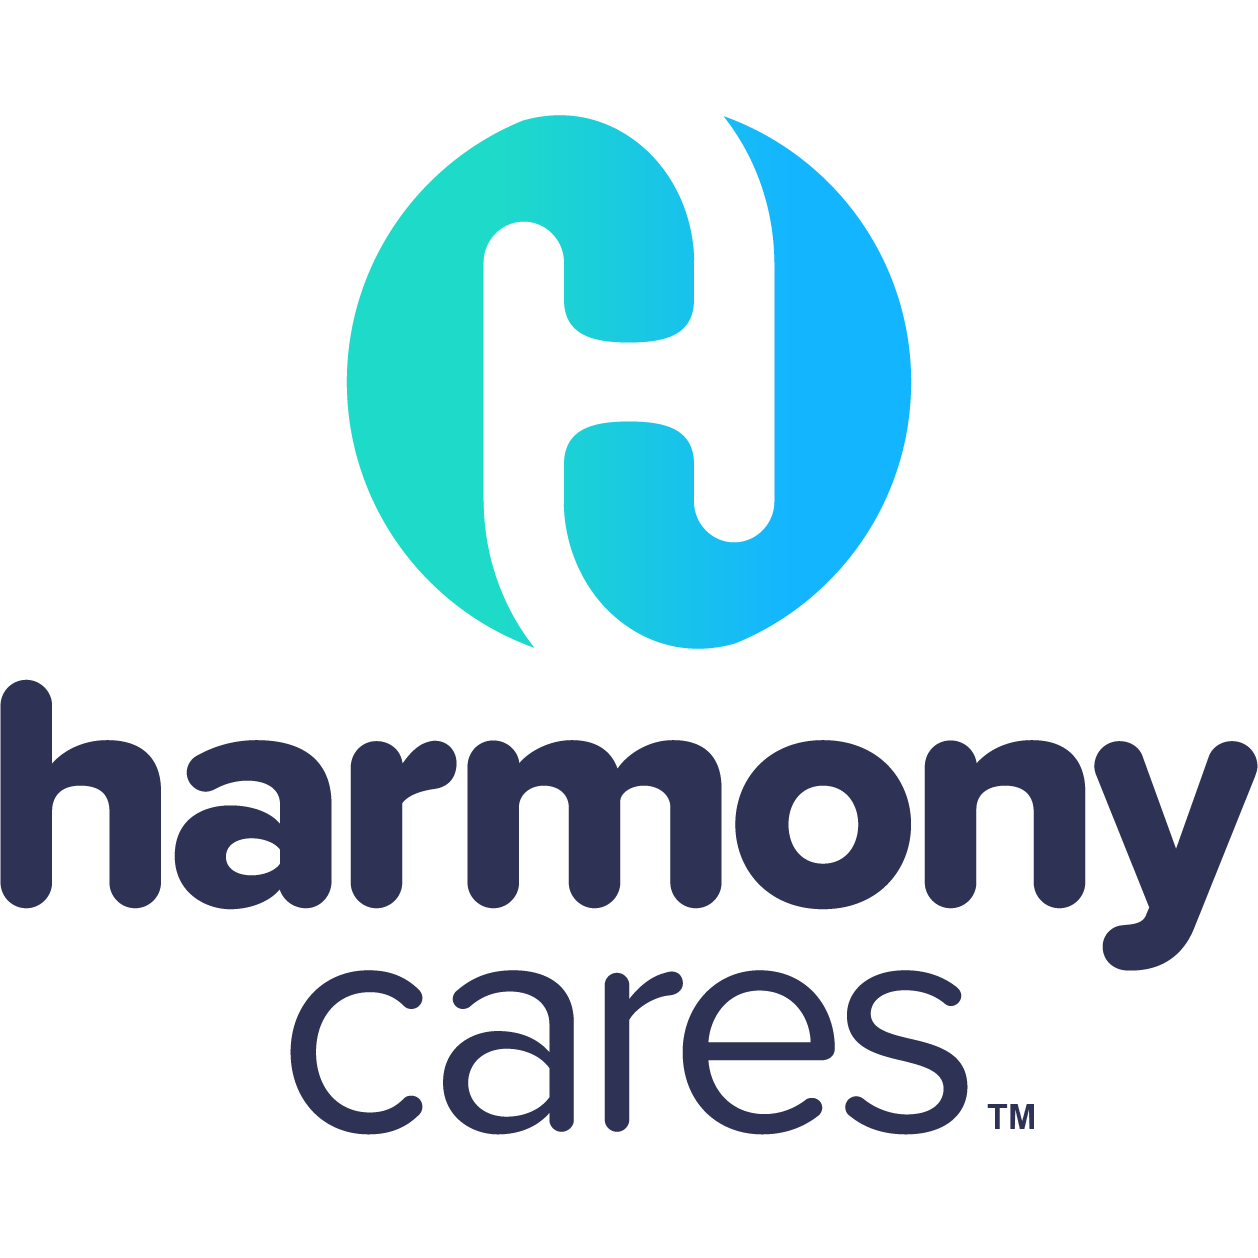 HarmonyCares Medical Group - Maumee, OH 43537 - (419)578-8594 | ShowMeLocal.com